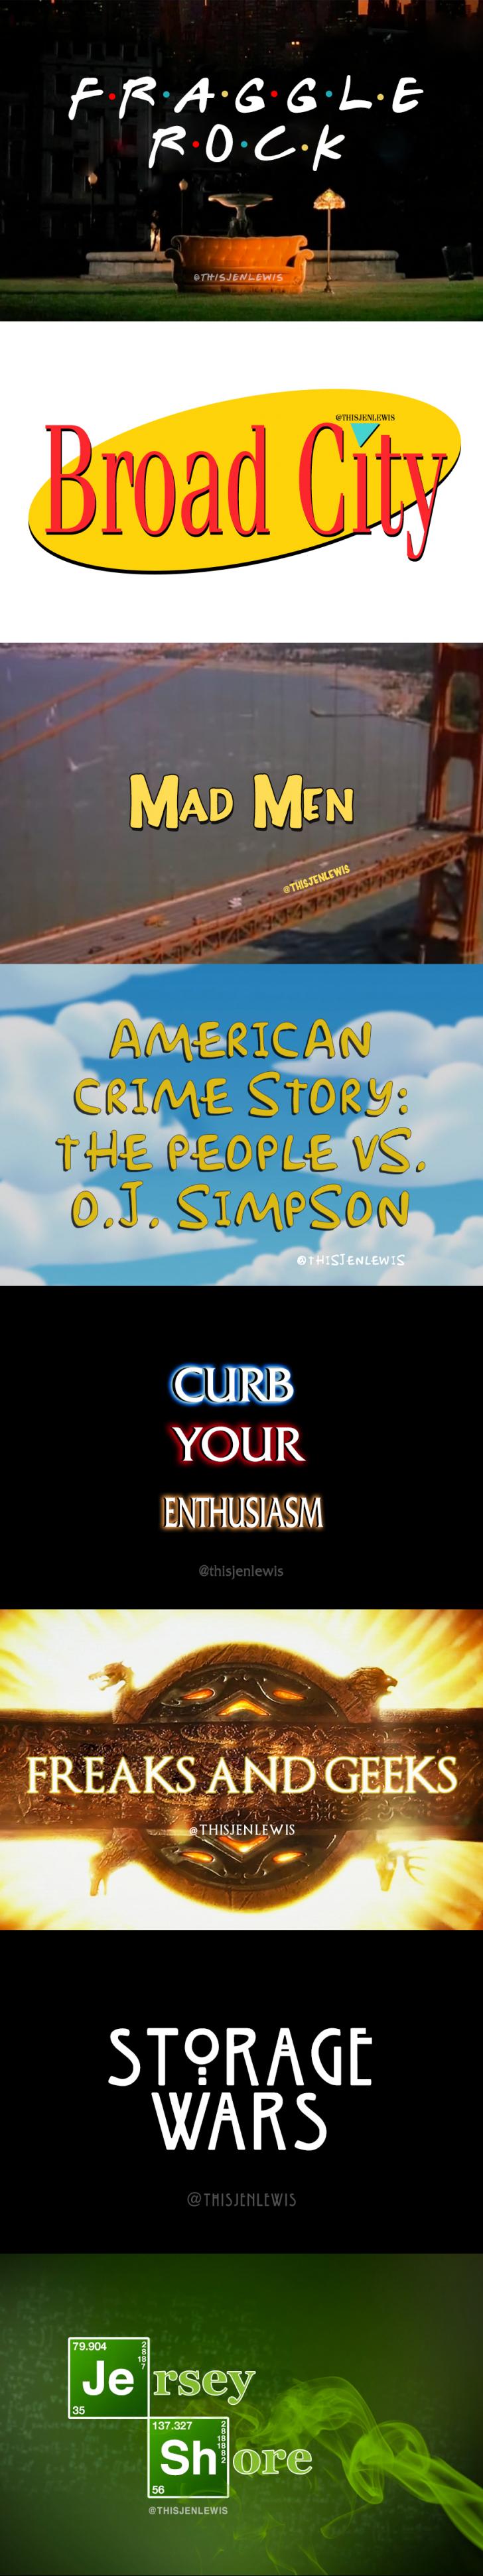 Sometimes when I'm in a bad mood I edit TV intros to say the wrong TV show